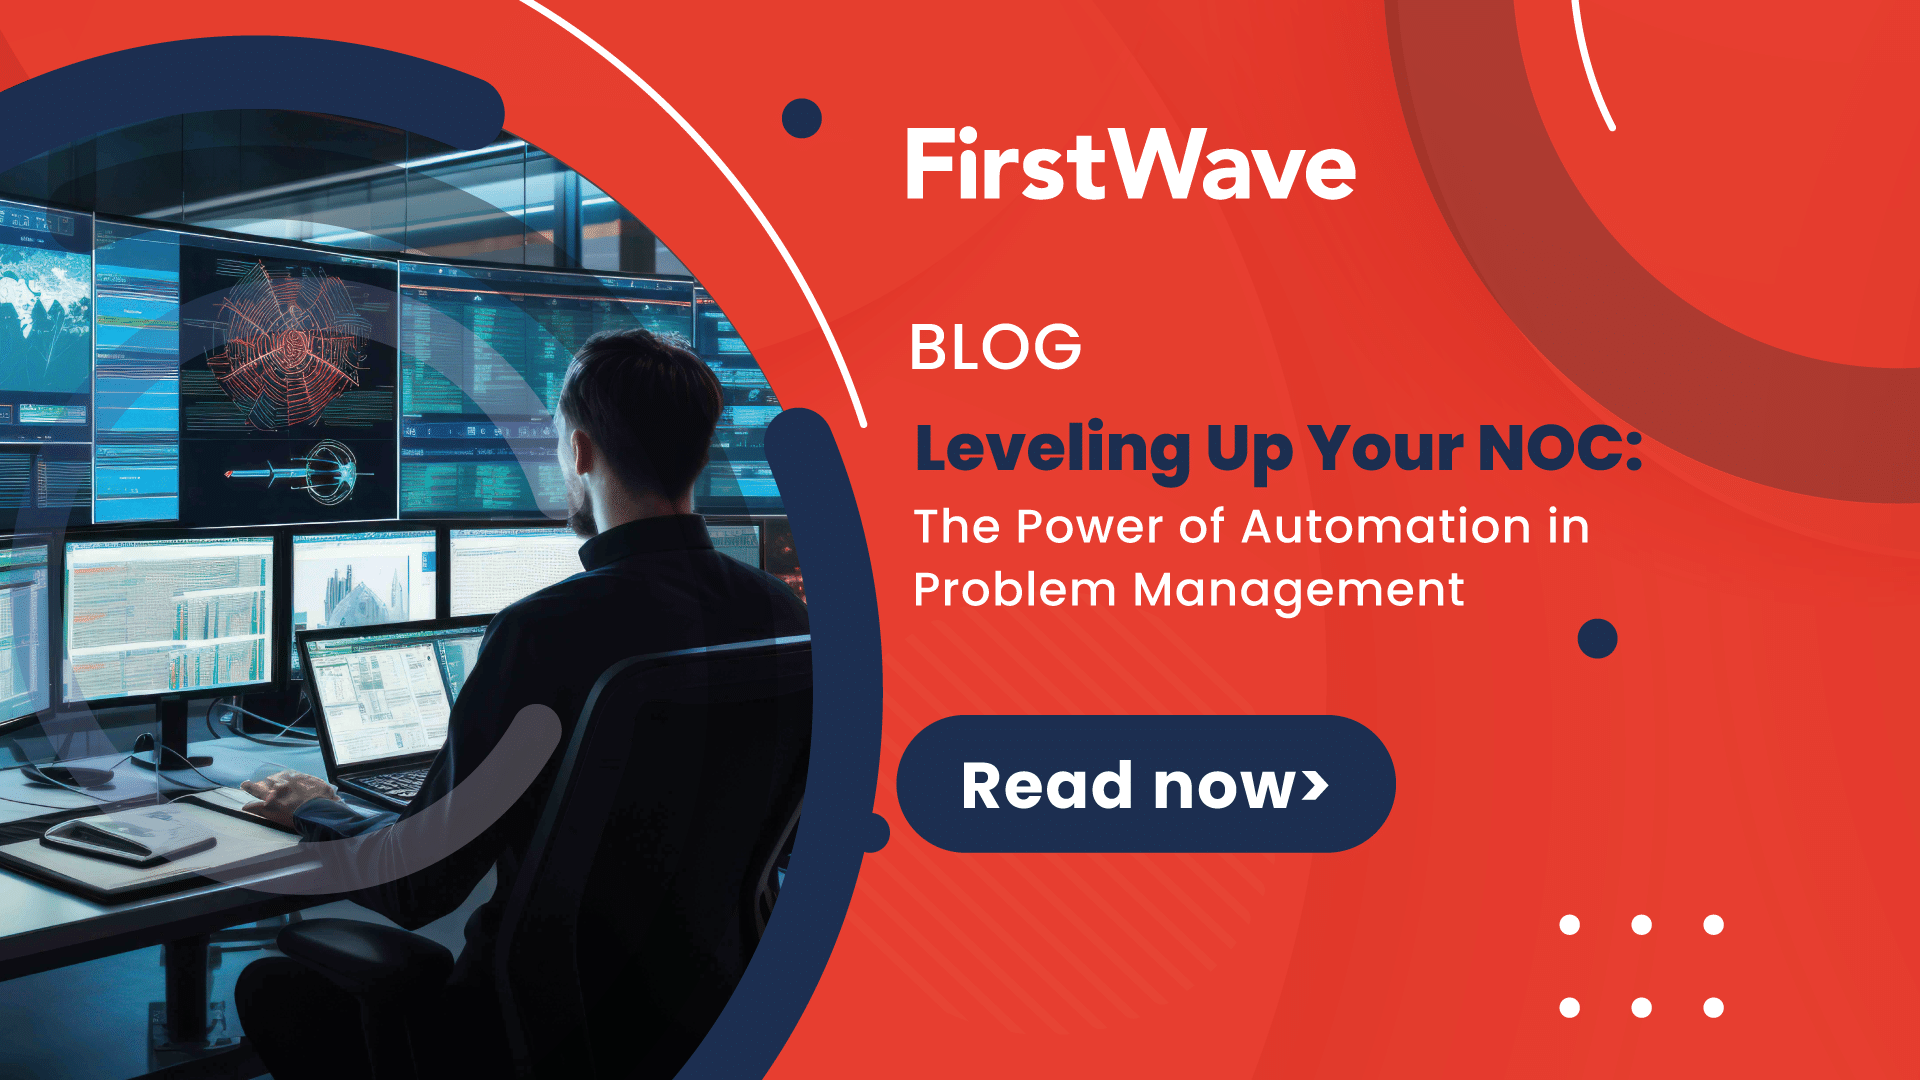 Leveling Up Your NOC: The Power of Automation in Problem Management